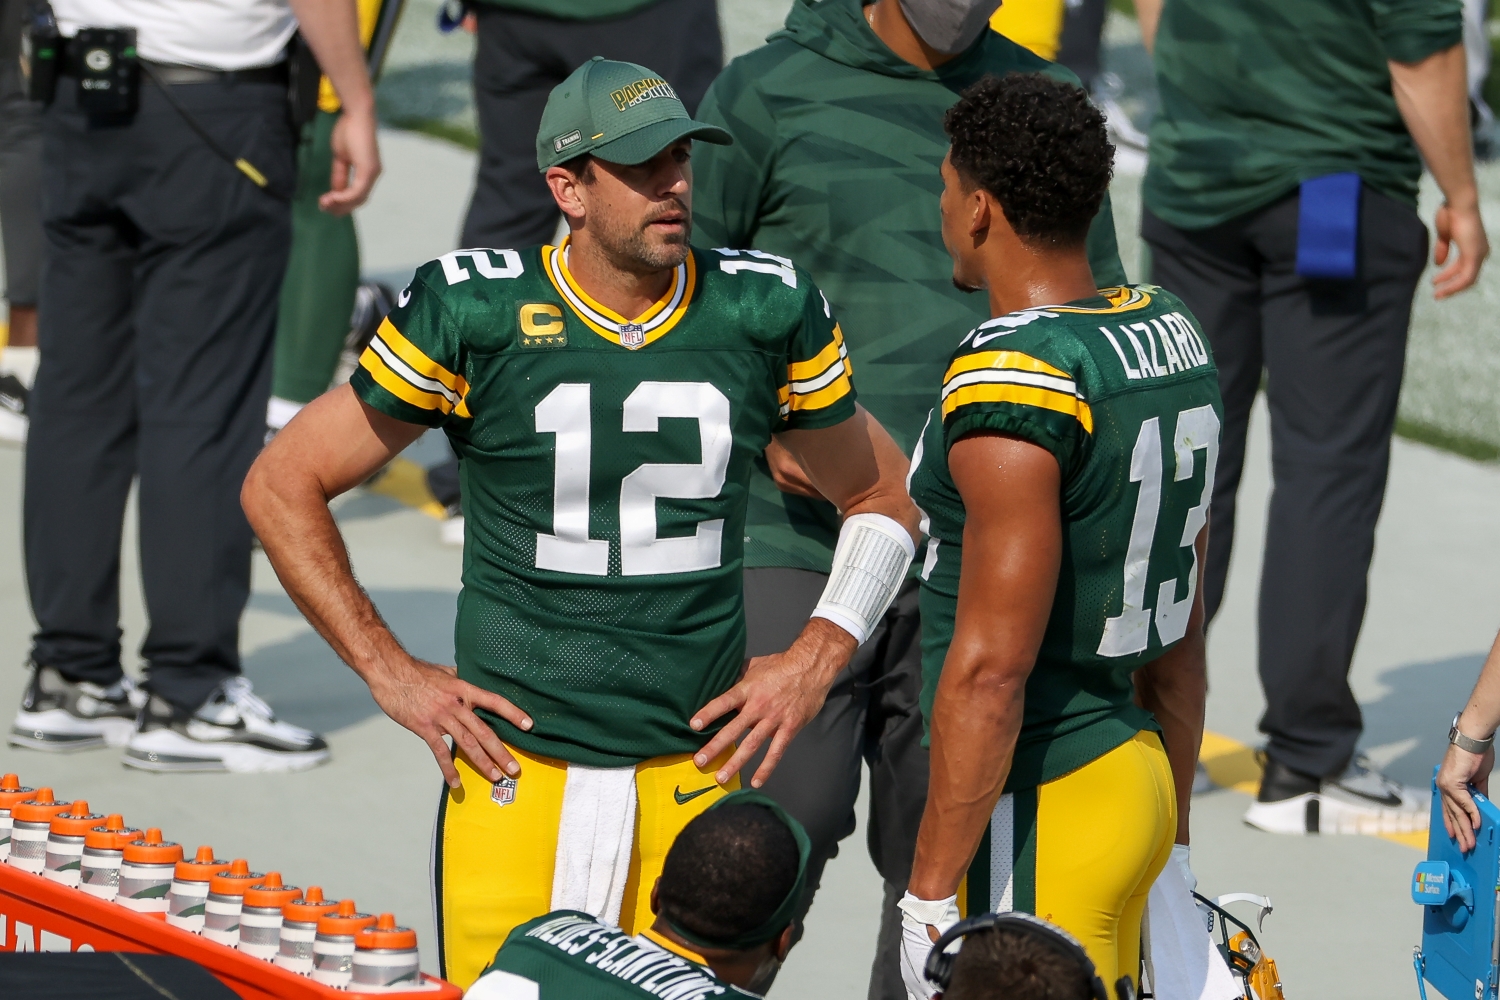 Green Bay Packers teammates Aaron Rodgers and Allen Lazard speak on the sideline.